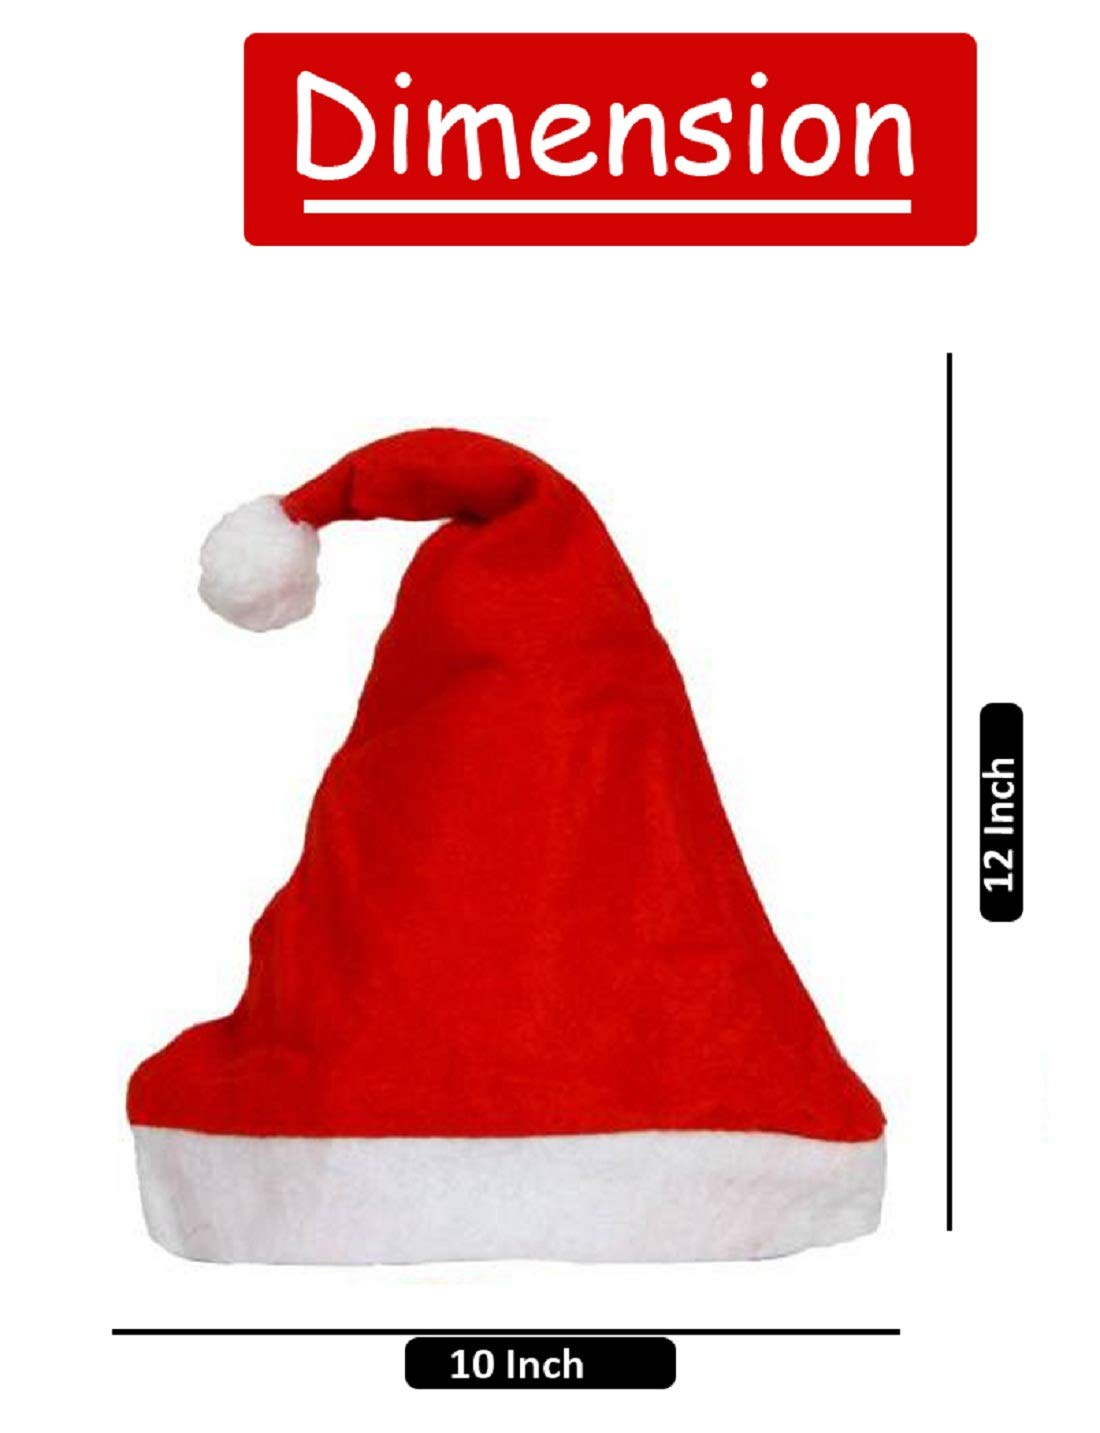 eCraftIndia Red and White Merry Christmas Hats, Santa Claus Caps for kids and Adults - Free Size XMAS Caps, Santa Claus Hats for Christmas, New Year, Festive Holiday Party (Set of 12) 6